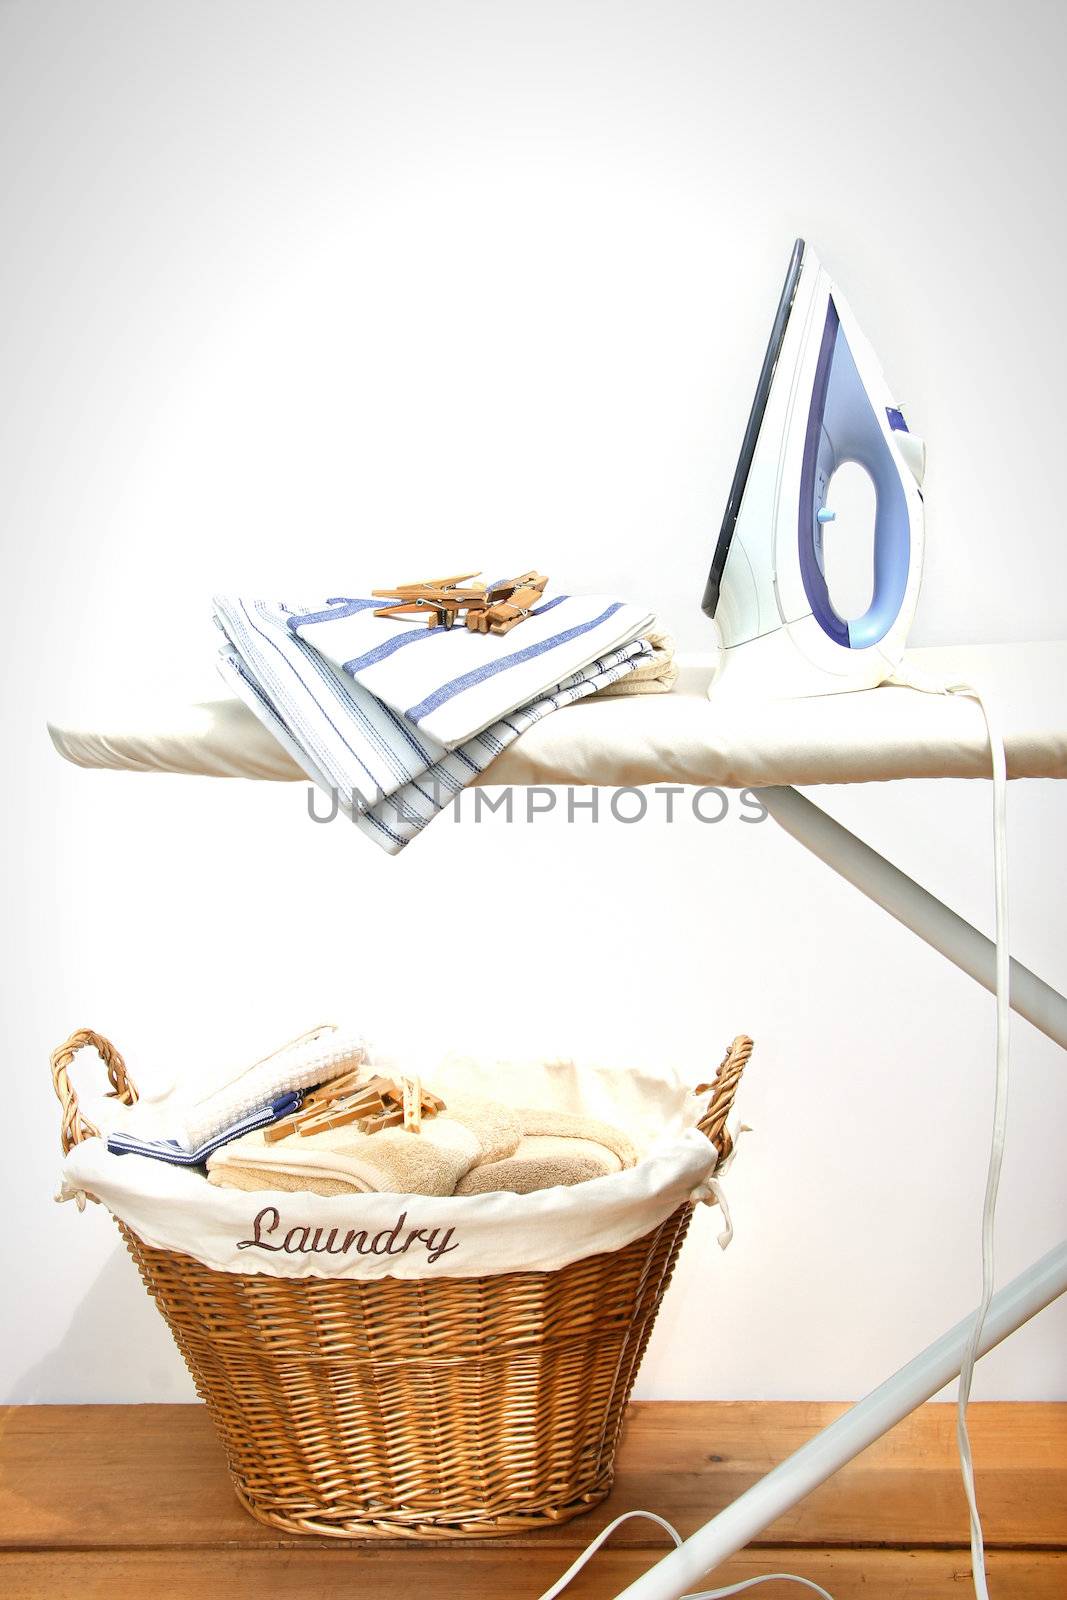 Ironing board with laundry against white background